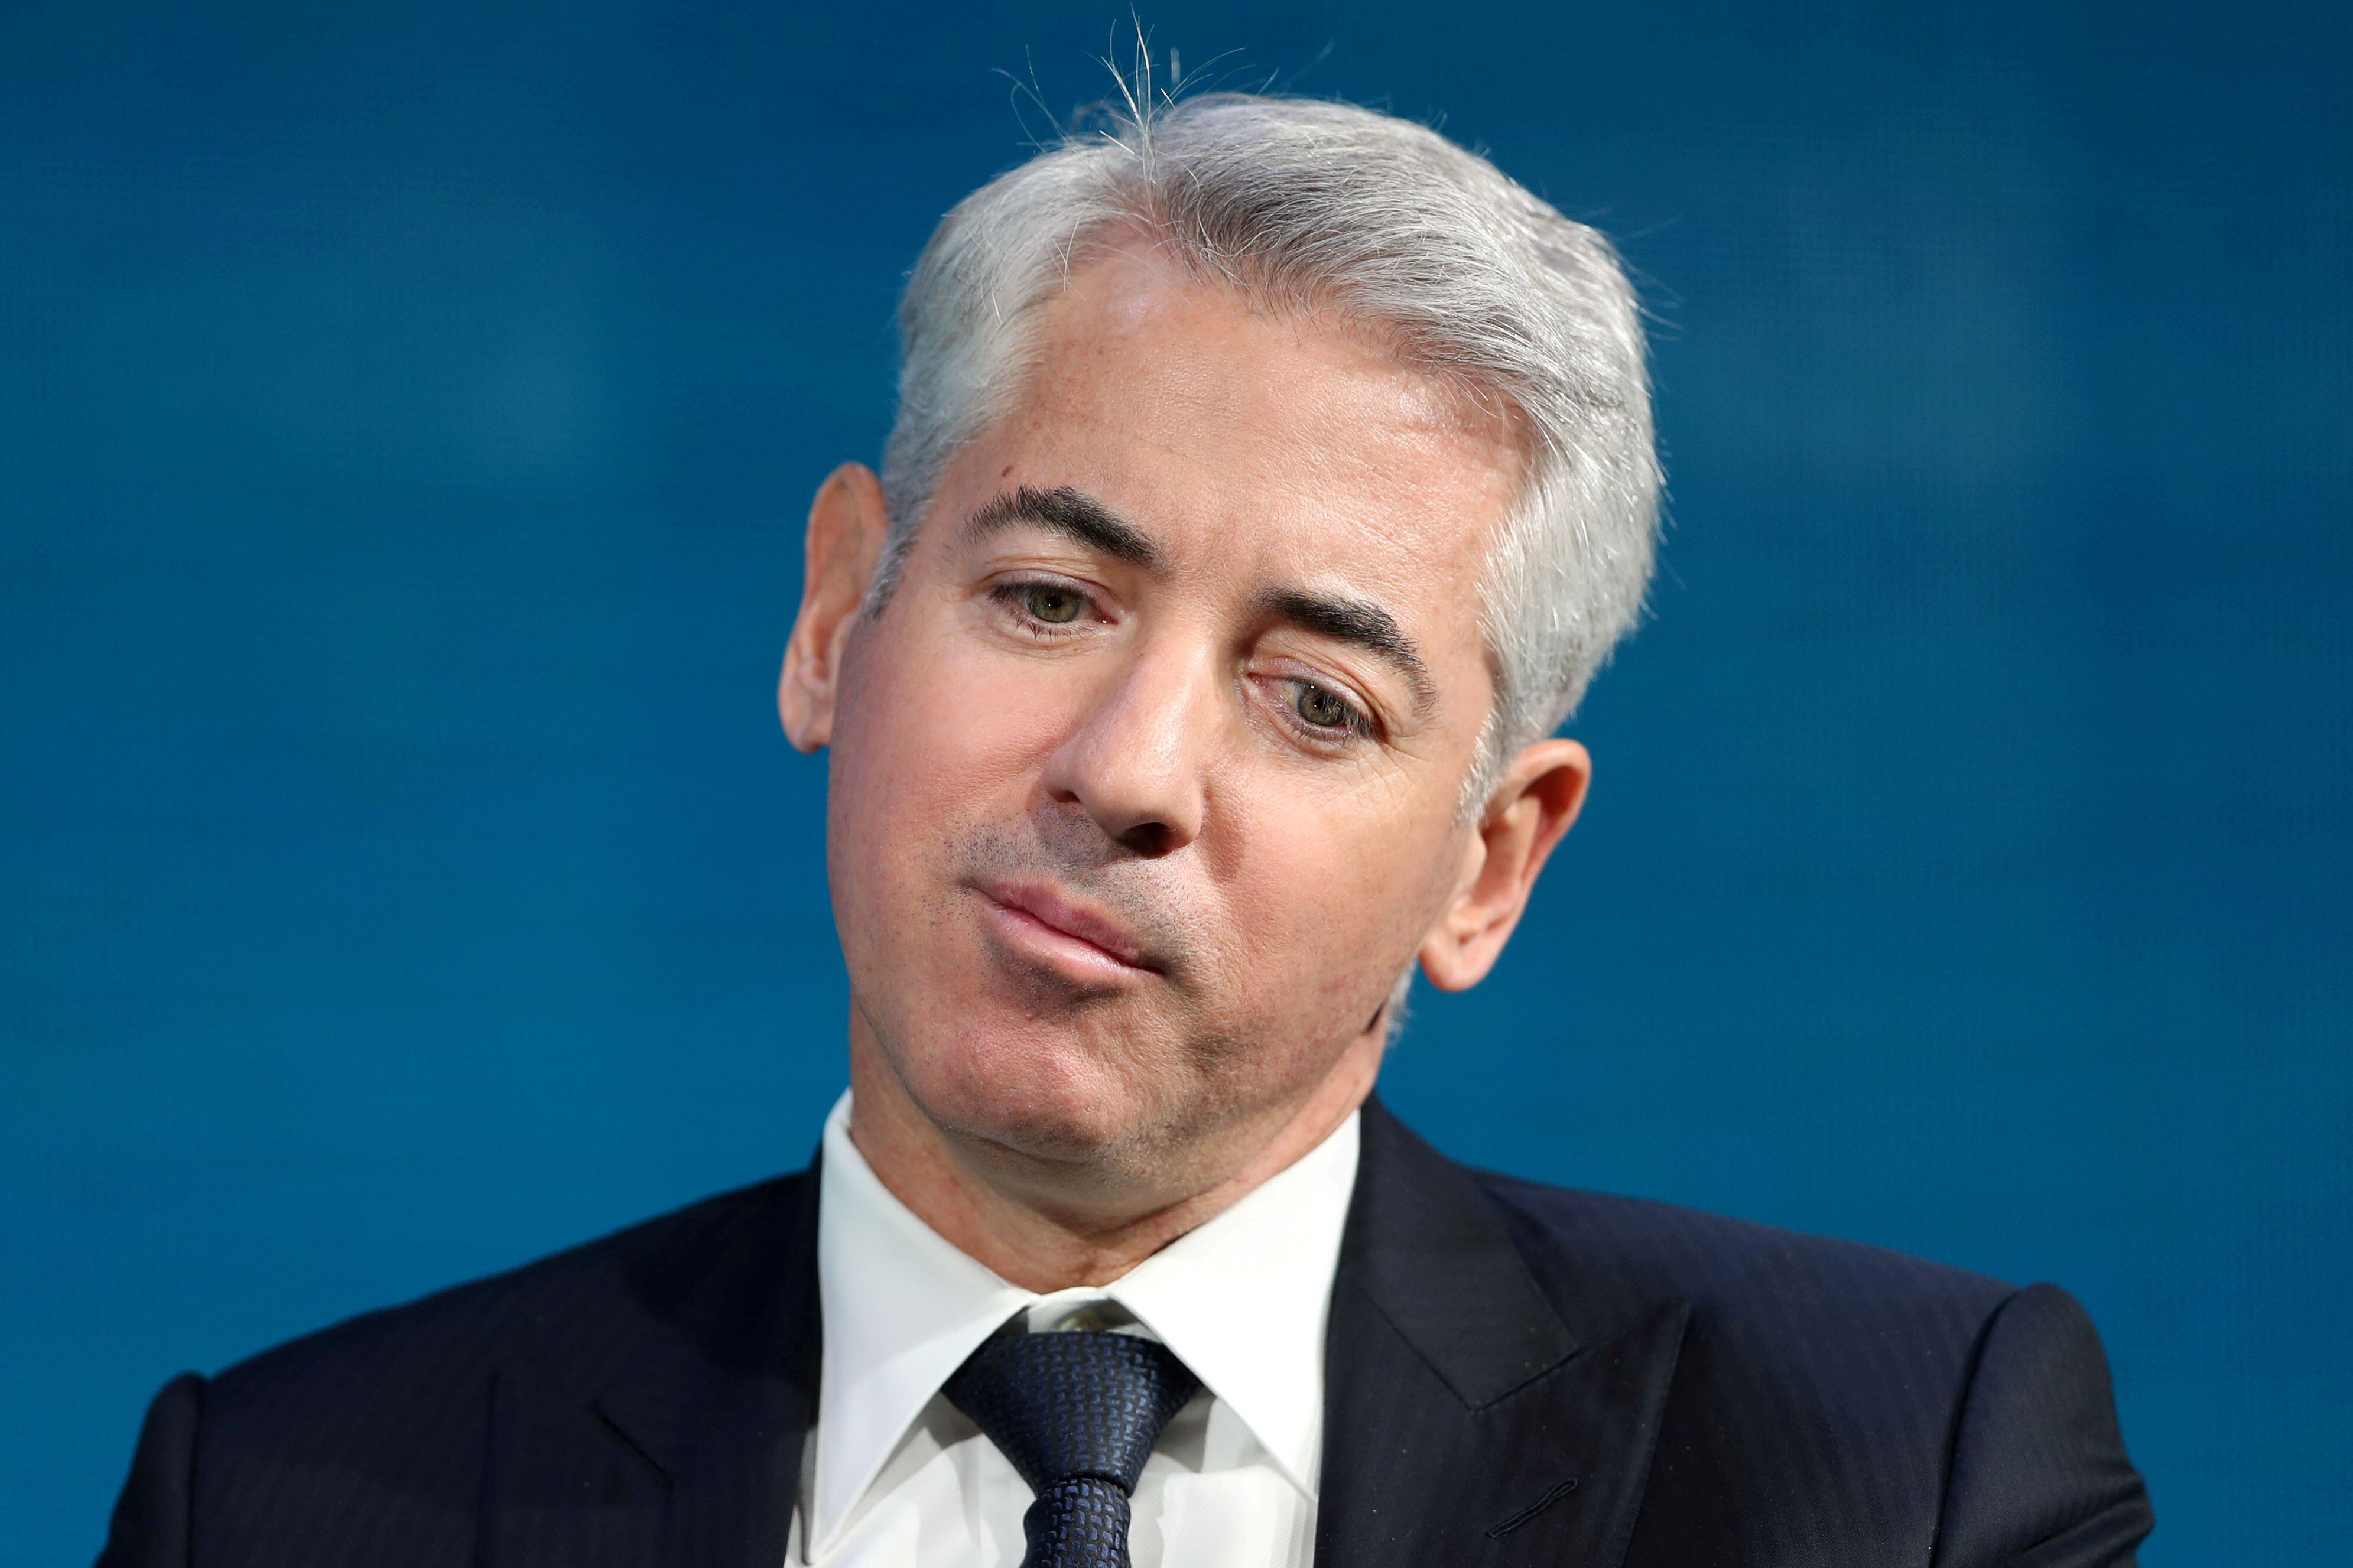 Bill Ackman, CEO of Pershing Square Capital
REUTERS/Mike Blake/File Photo